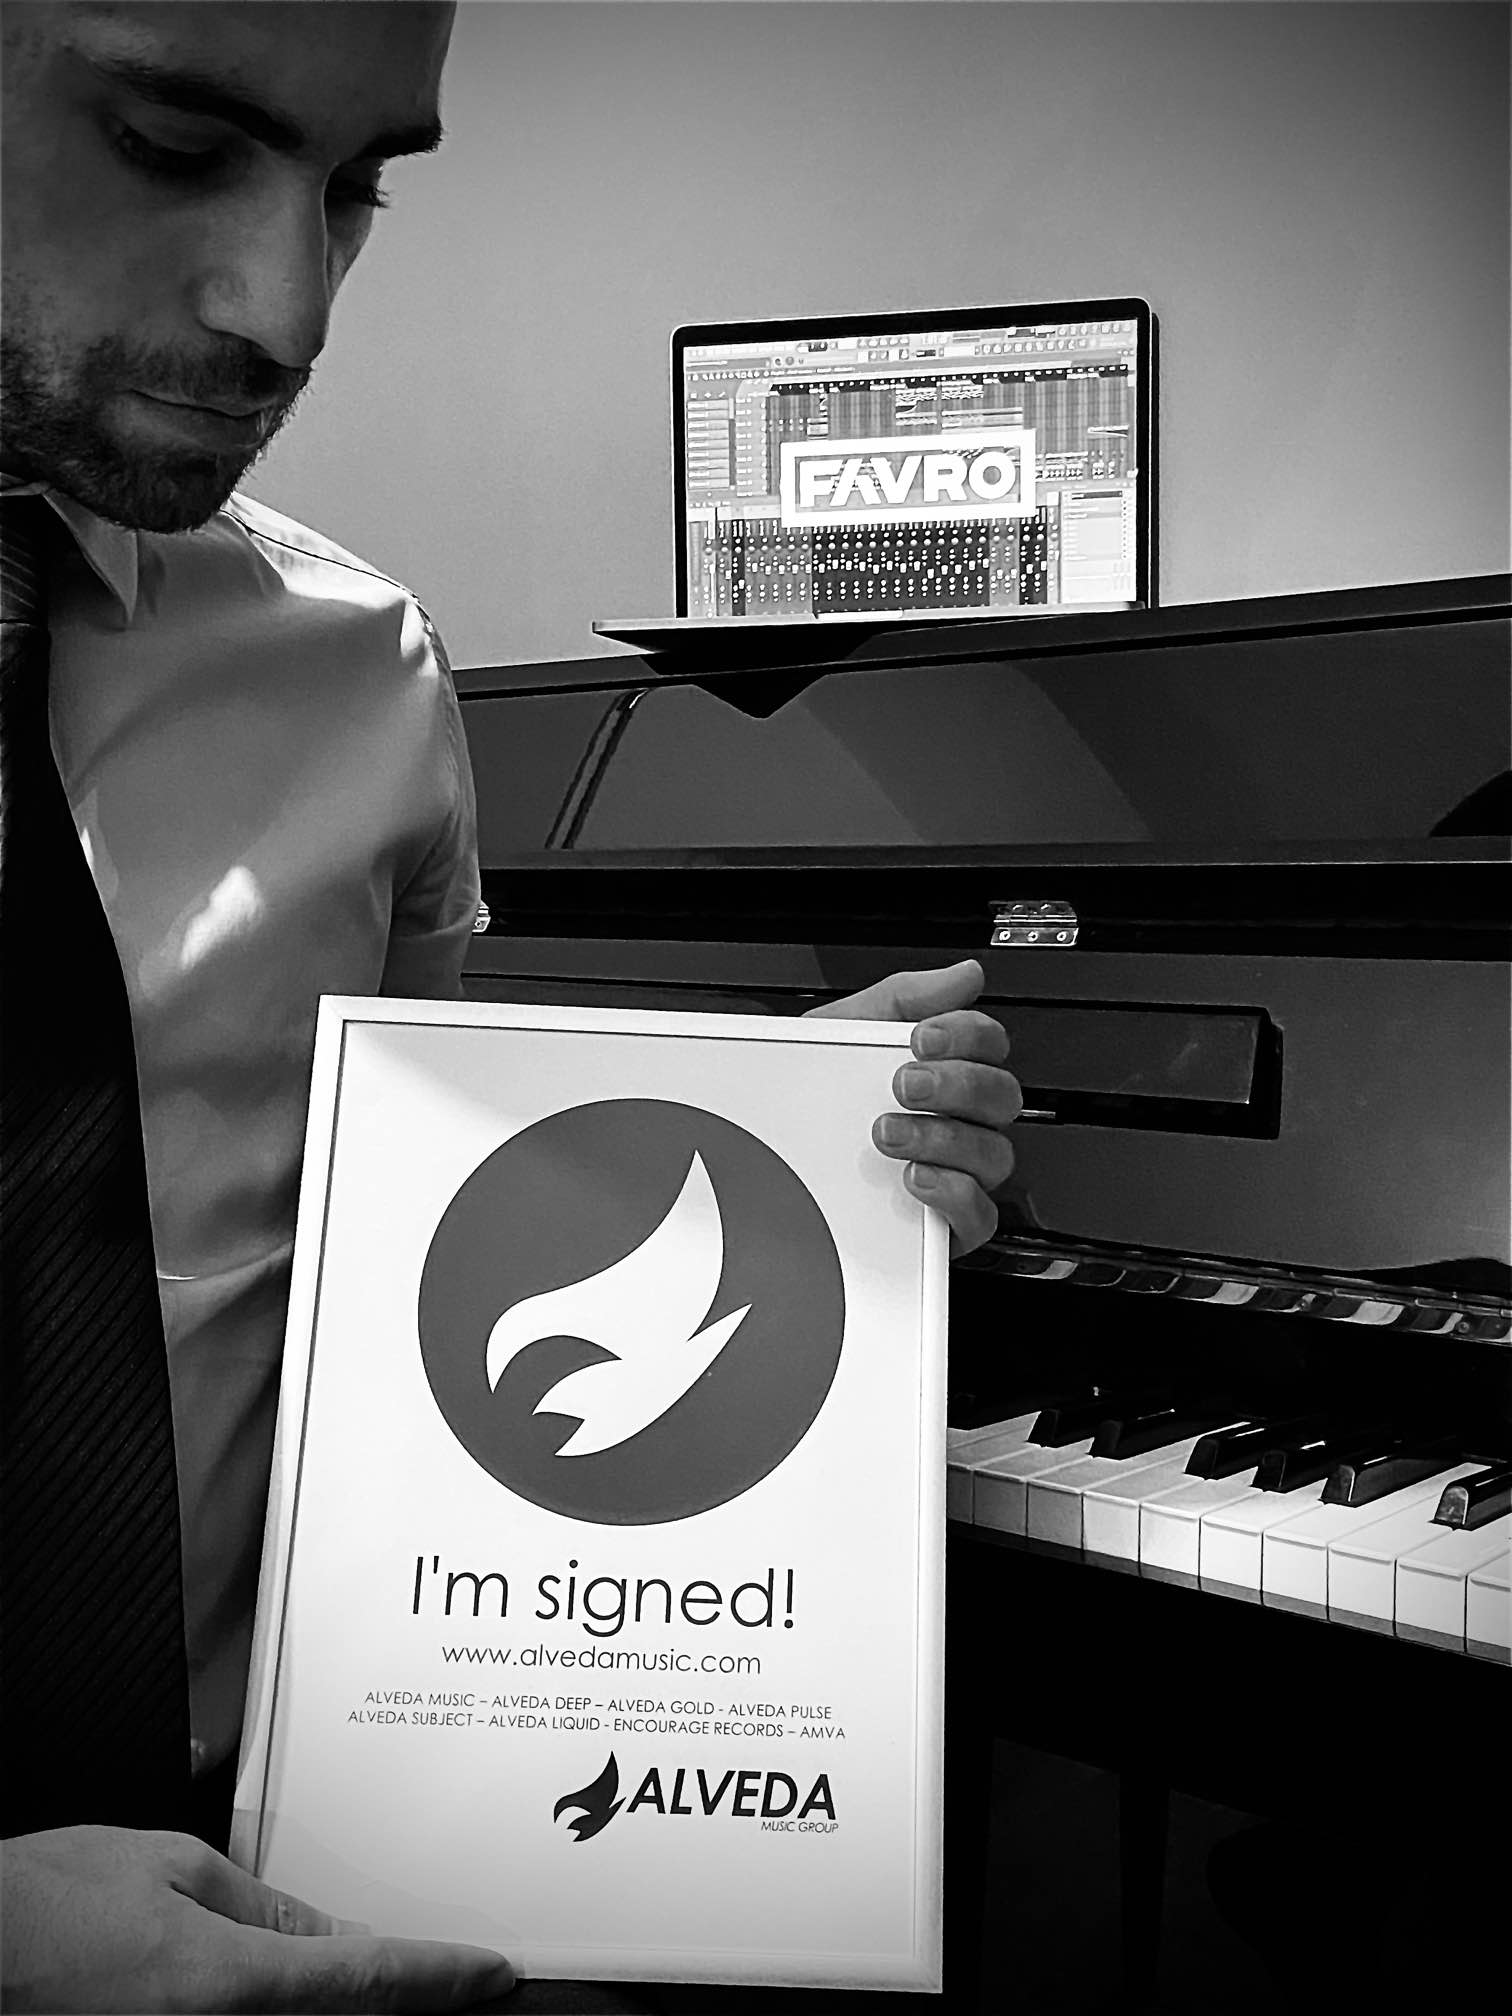 Guillaume Favro - Signed music contract